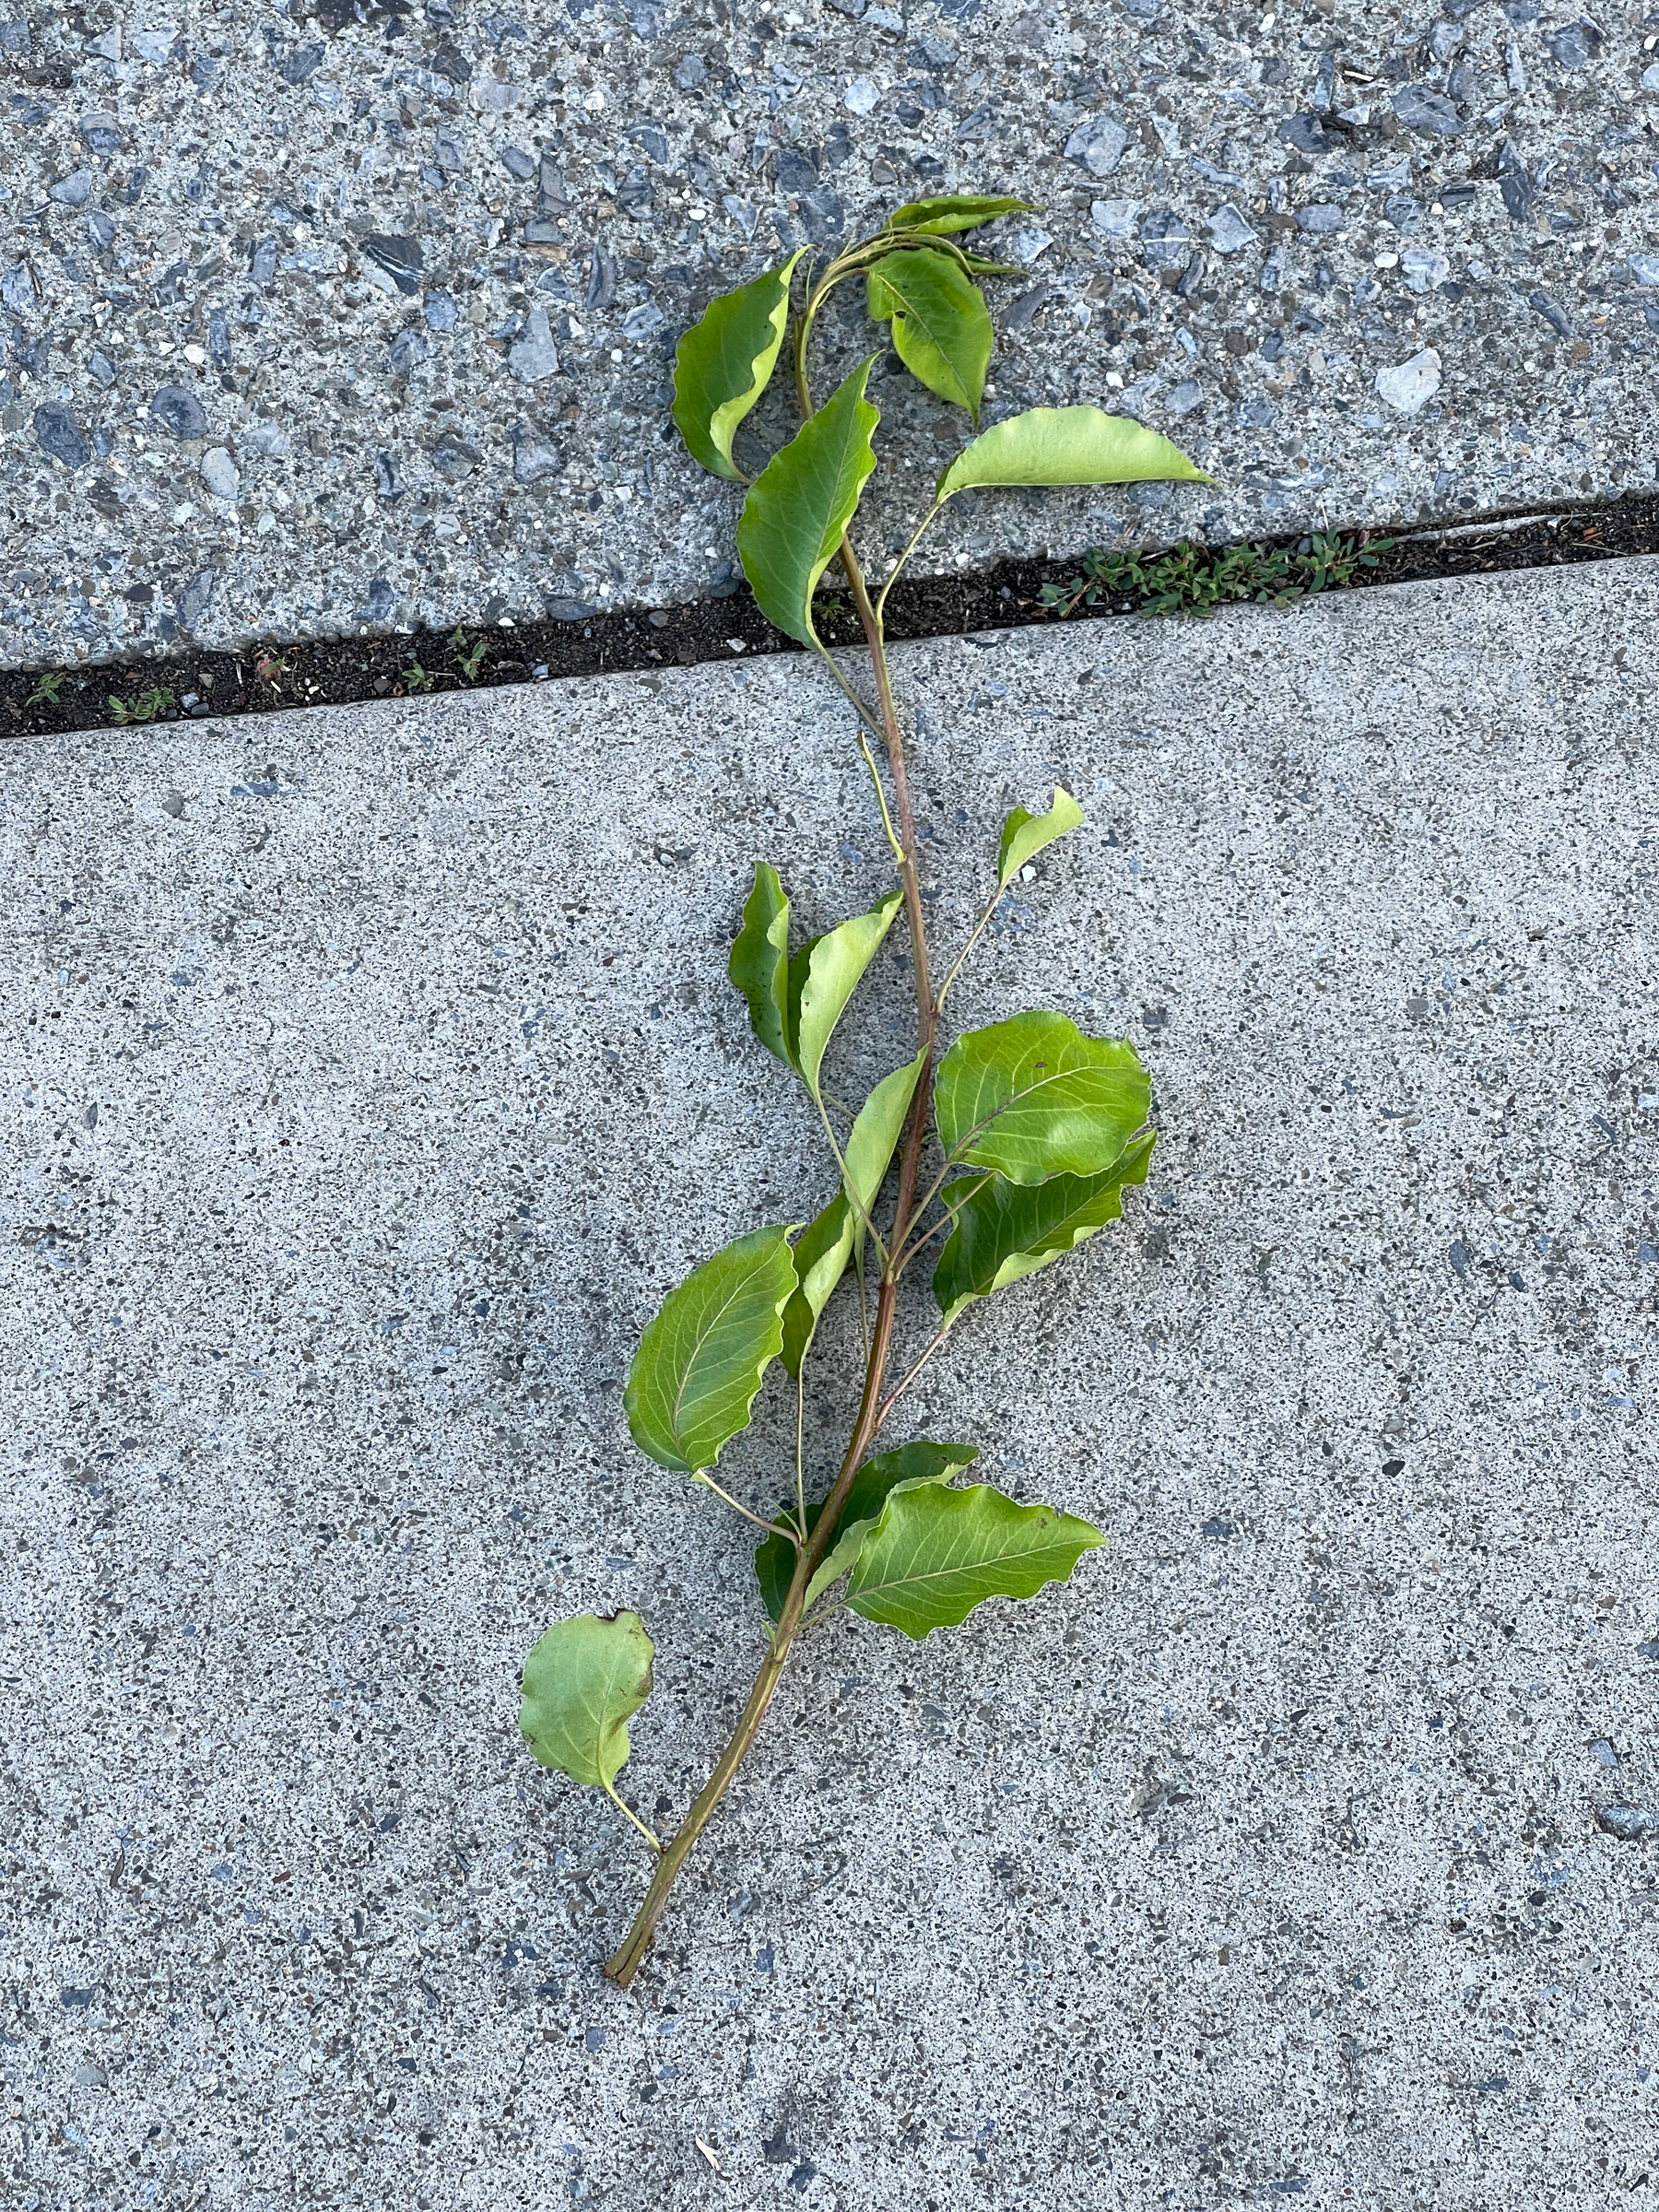 Branch and leaves on concrete sidewalk after a storm.